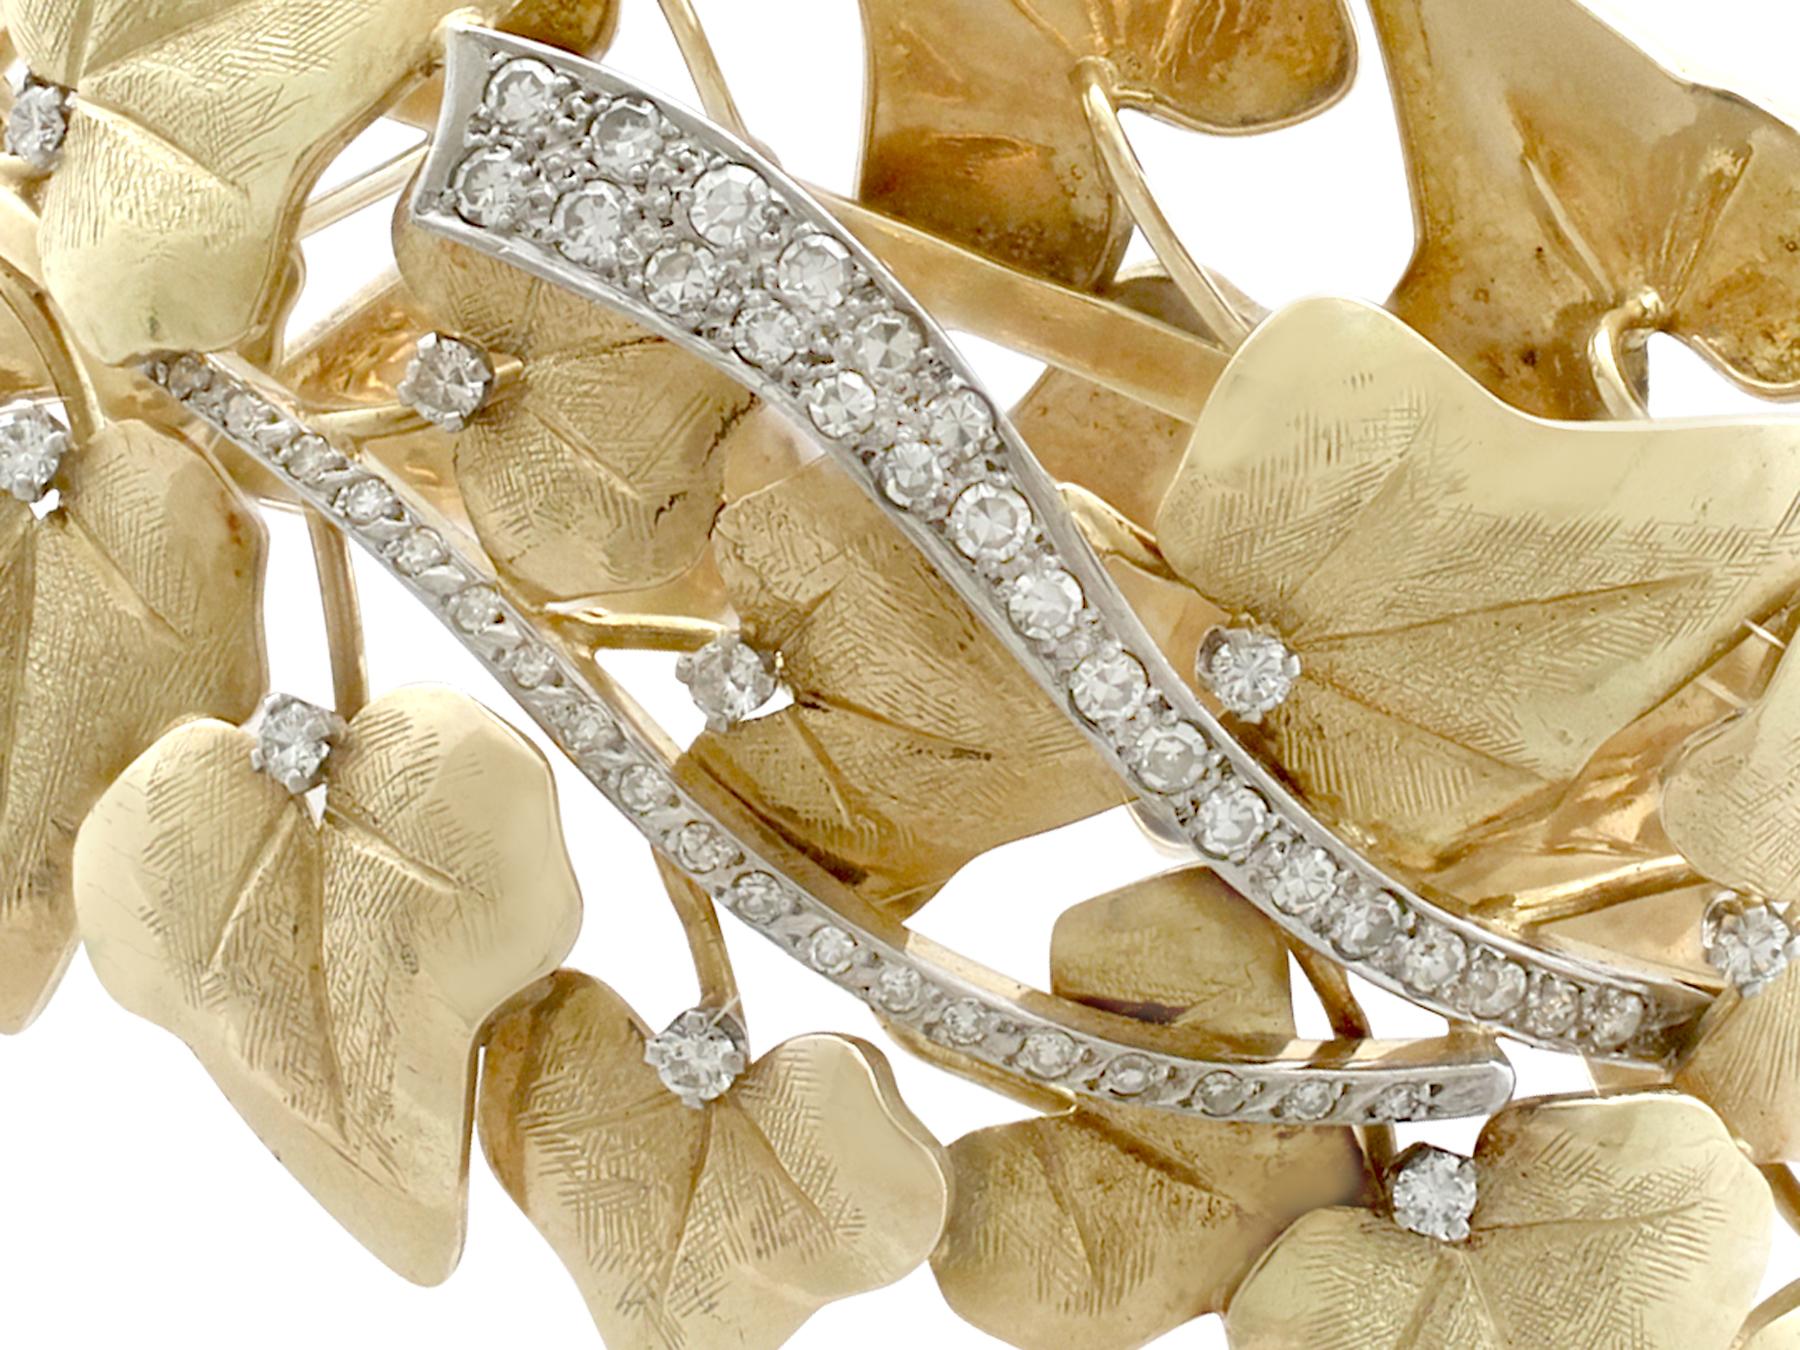 A stunning, fine and impressive 1.12 carat diamond and 18k yellow gold, 18 karat white gold set bangle; an addition to our antique jewelry and estate jewelry collections

This exceptional antique bangle with diamonds has been crafted in 18k yellow